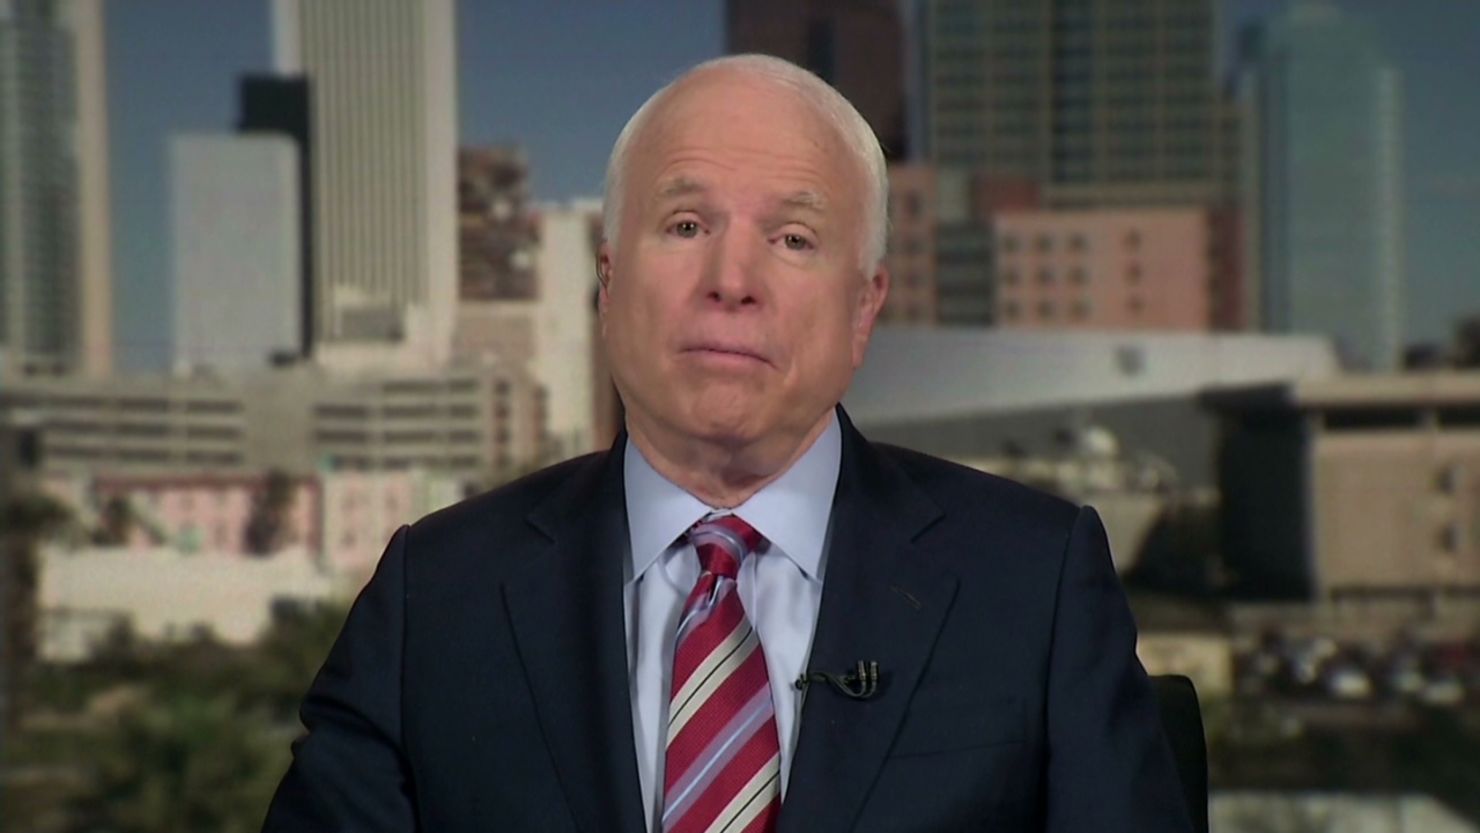 The GOP in John McCain's state has censured him for not being conservative enough.